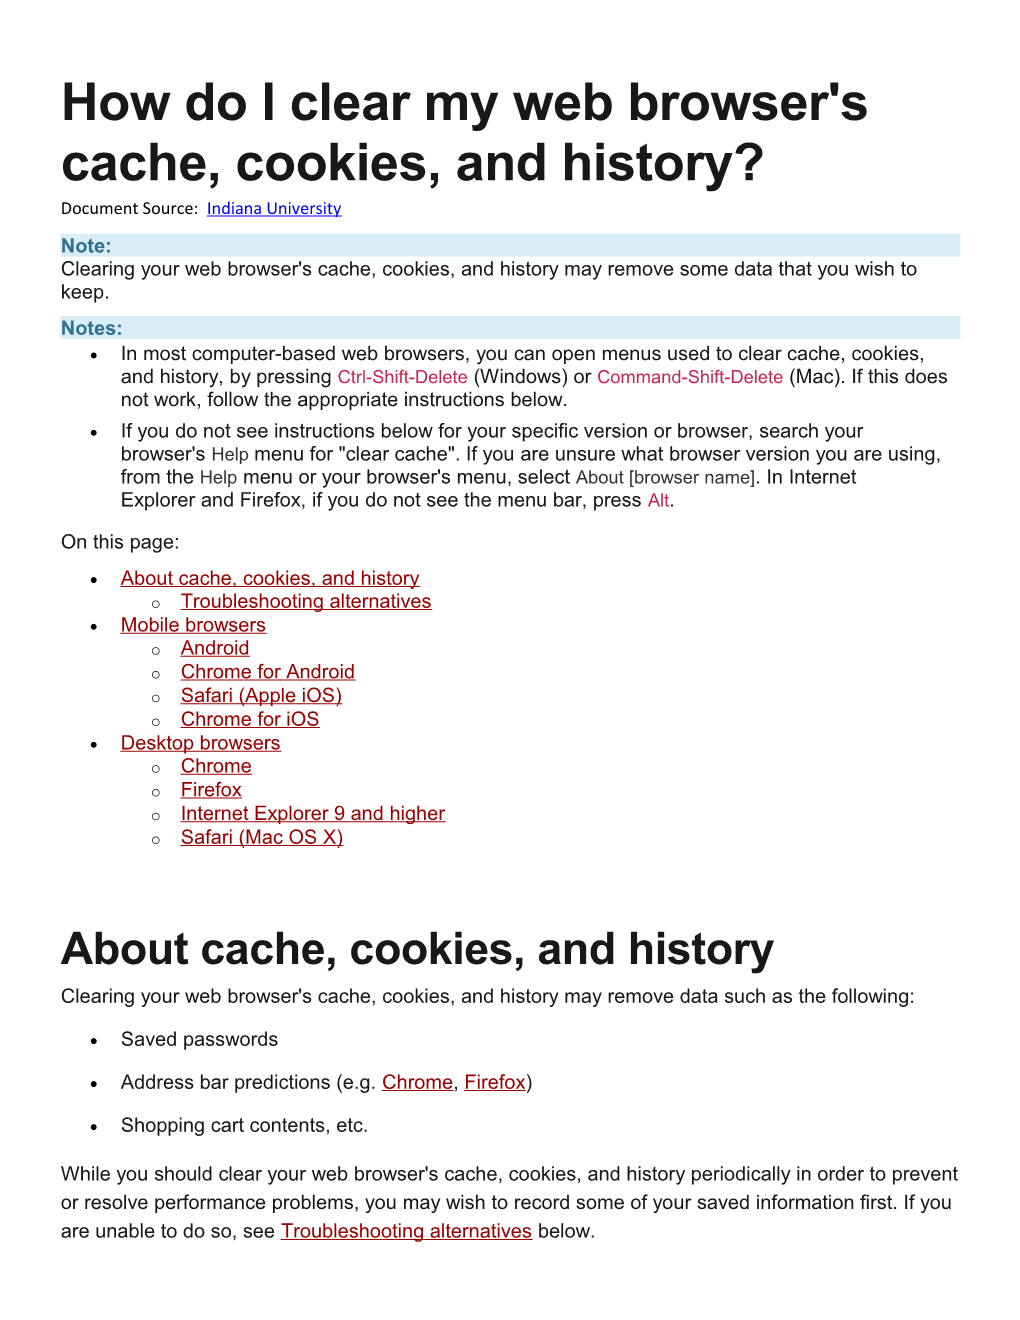 How Do I Clear My Web Browser's Cache, Cookies, and History?